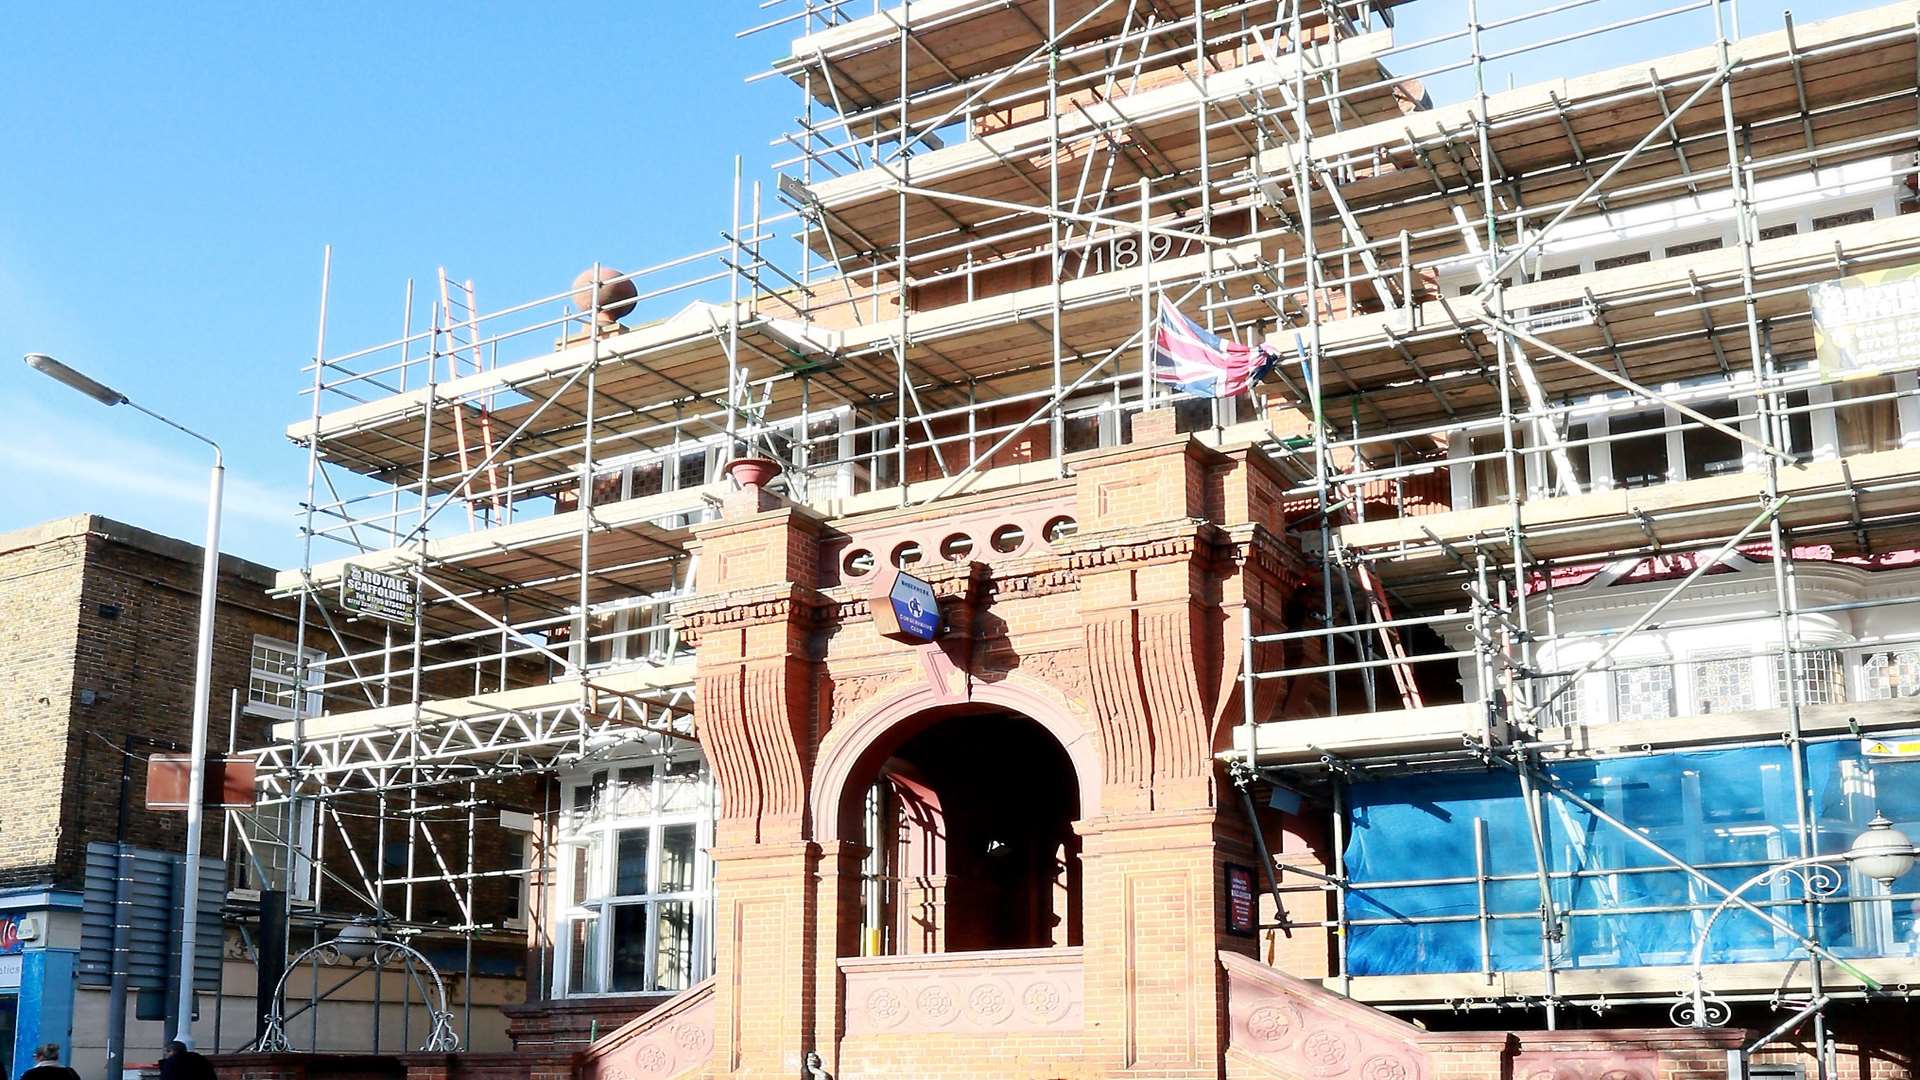 The Sheerness Conservative Club is undergoing a renovation for it's 120th anniversary